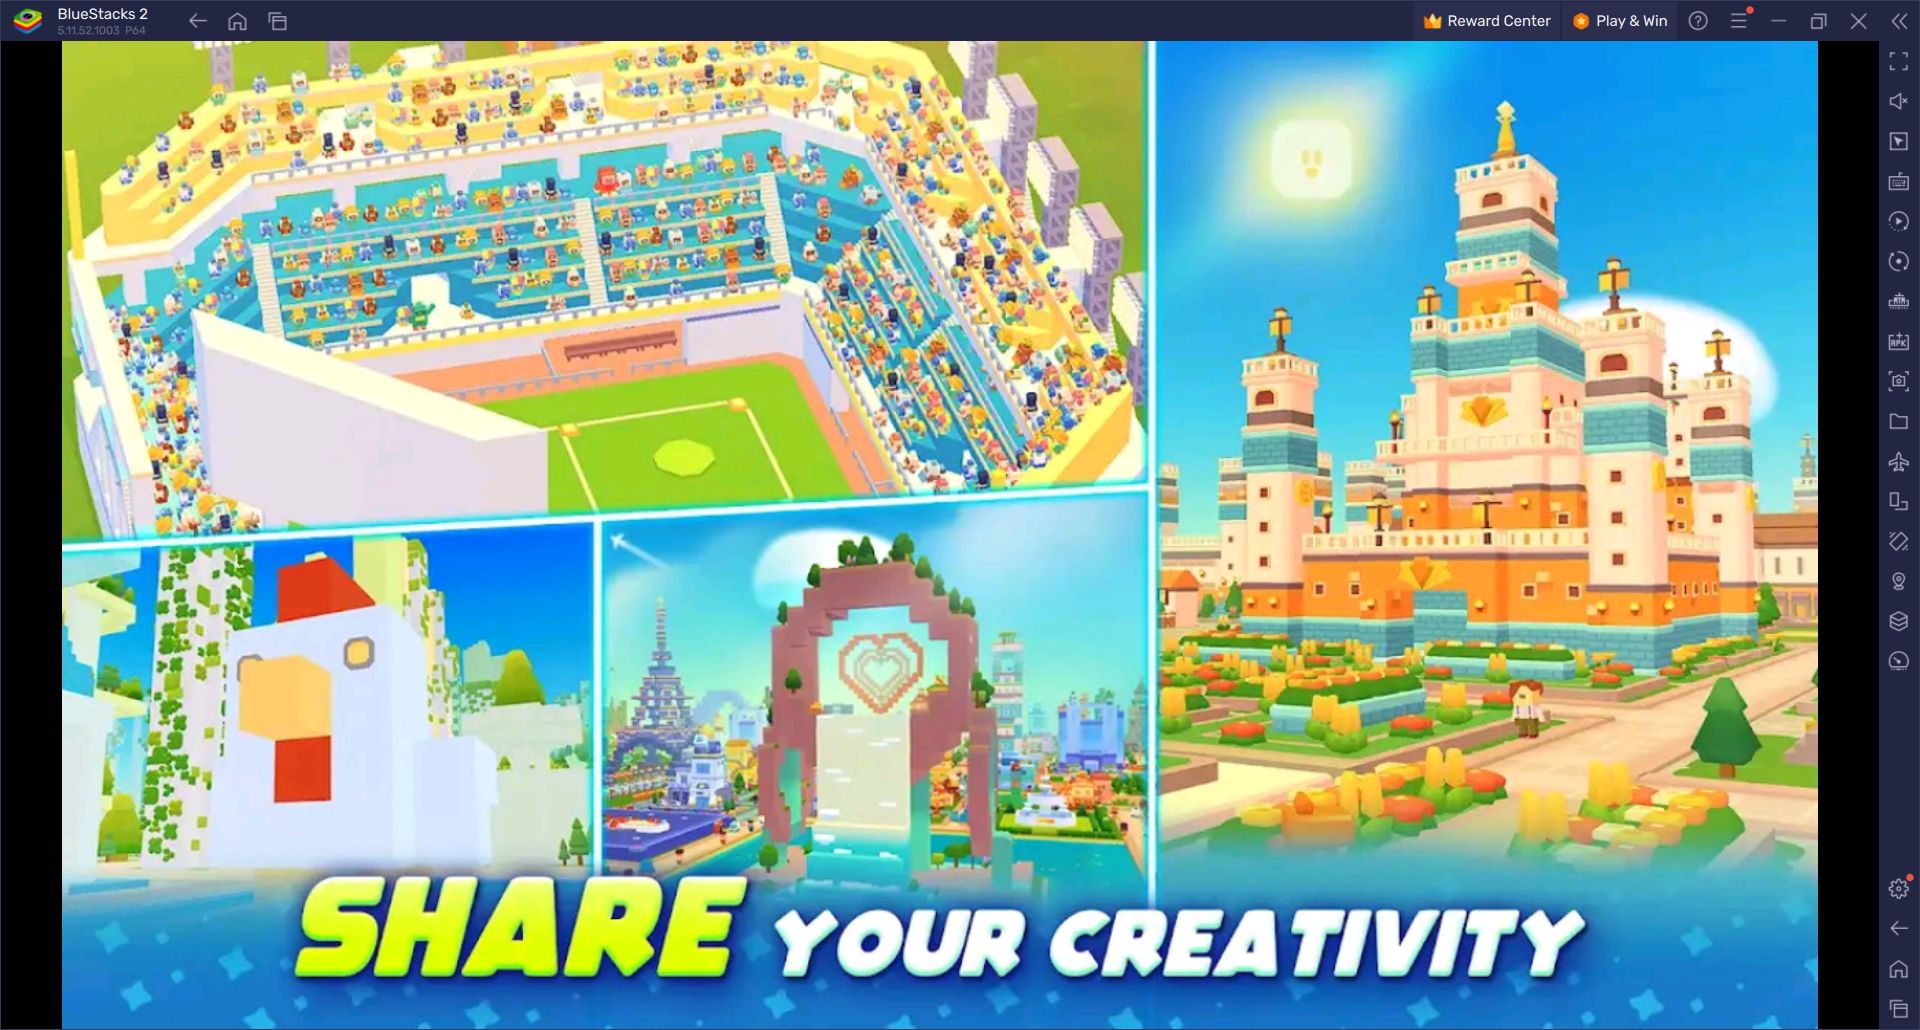 Brixity Installation Guide: Build Your Own City on PC with BlueStacks